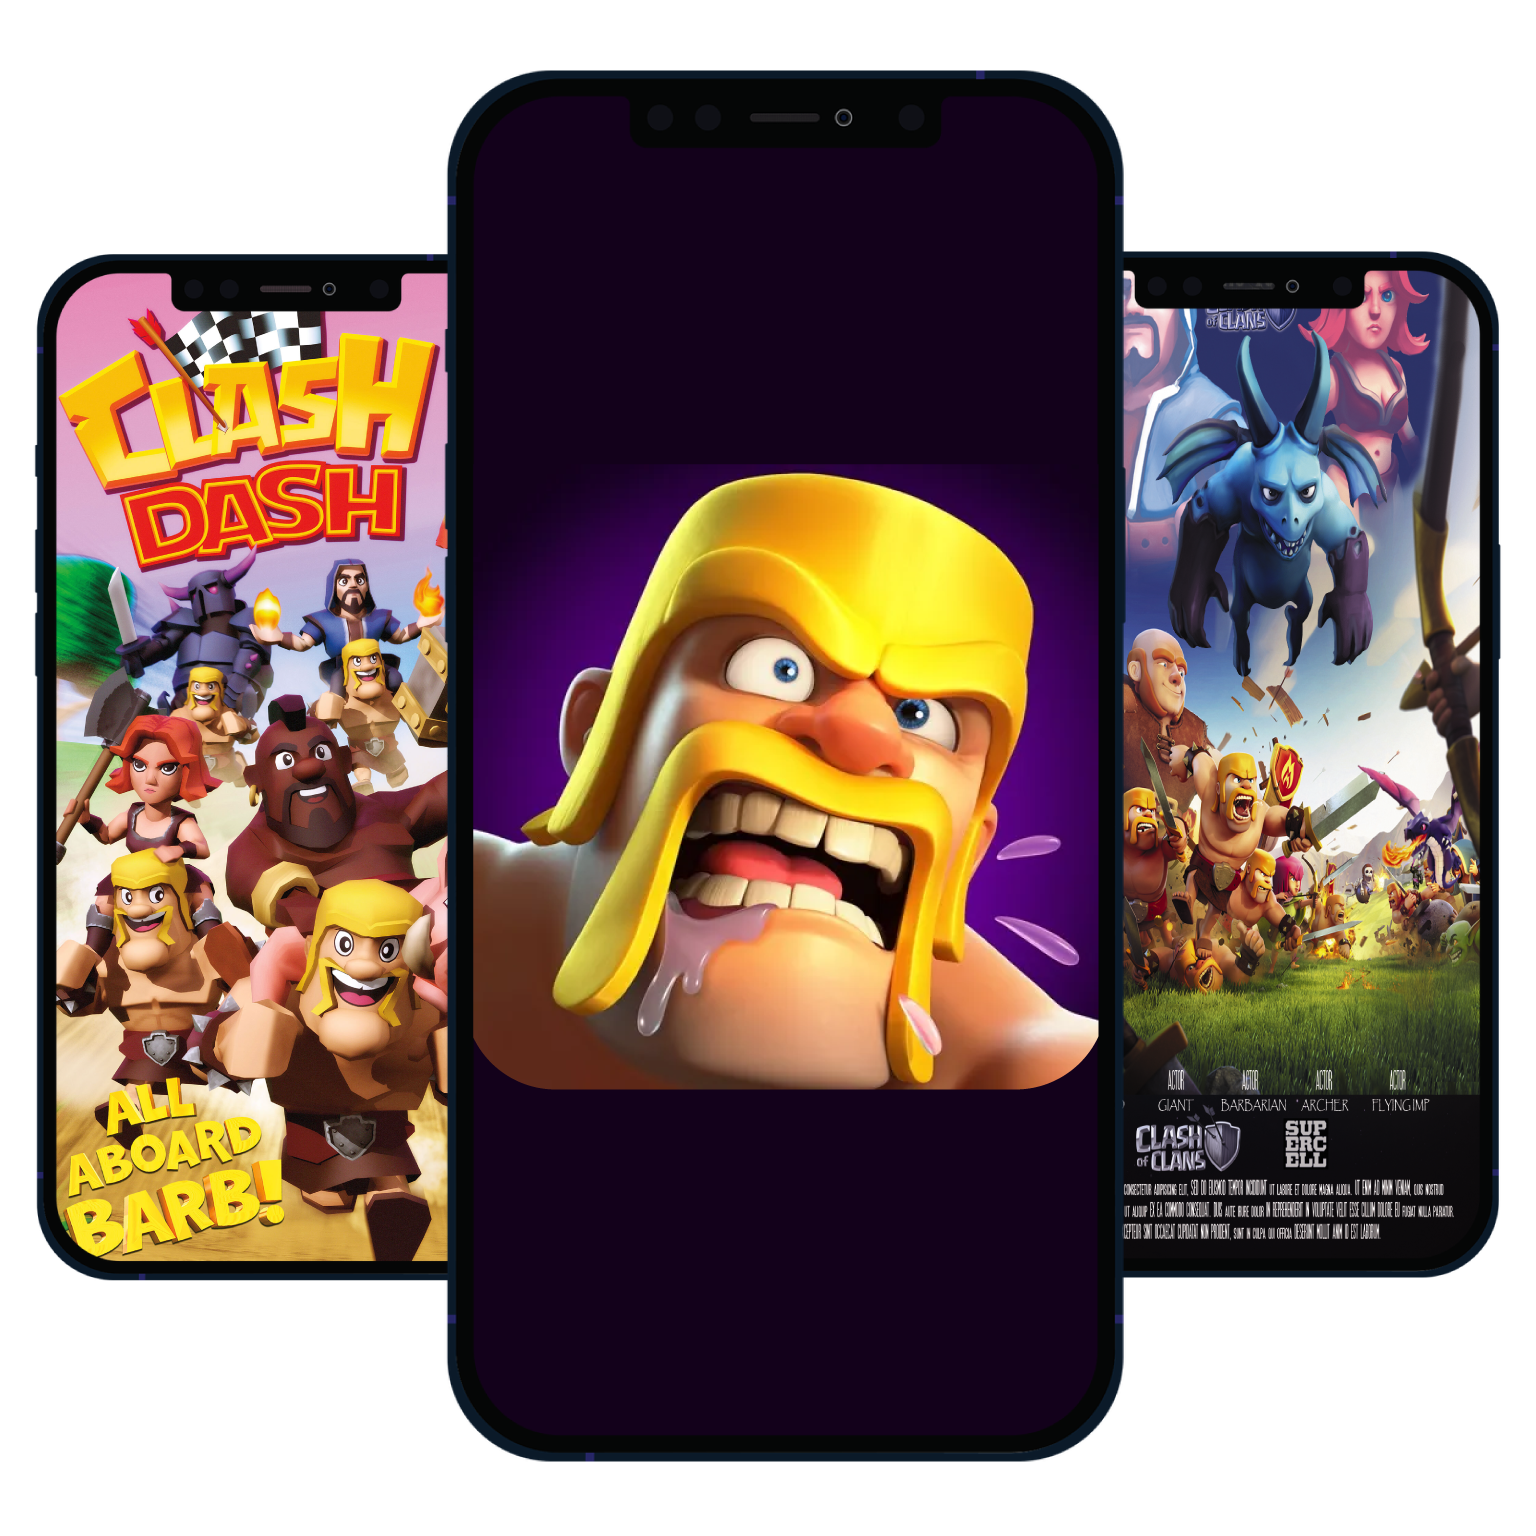 What is Clash of Clans and Why is it considered a Gaming App?